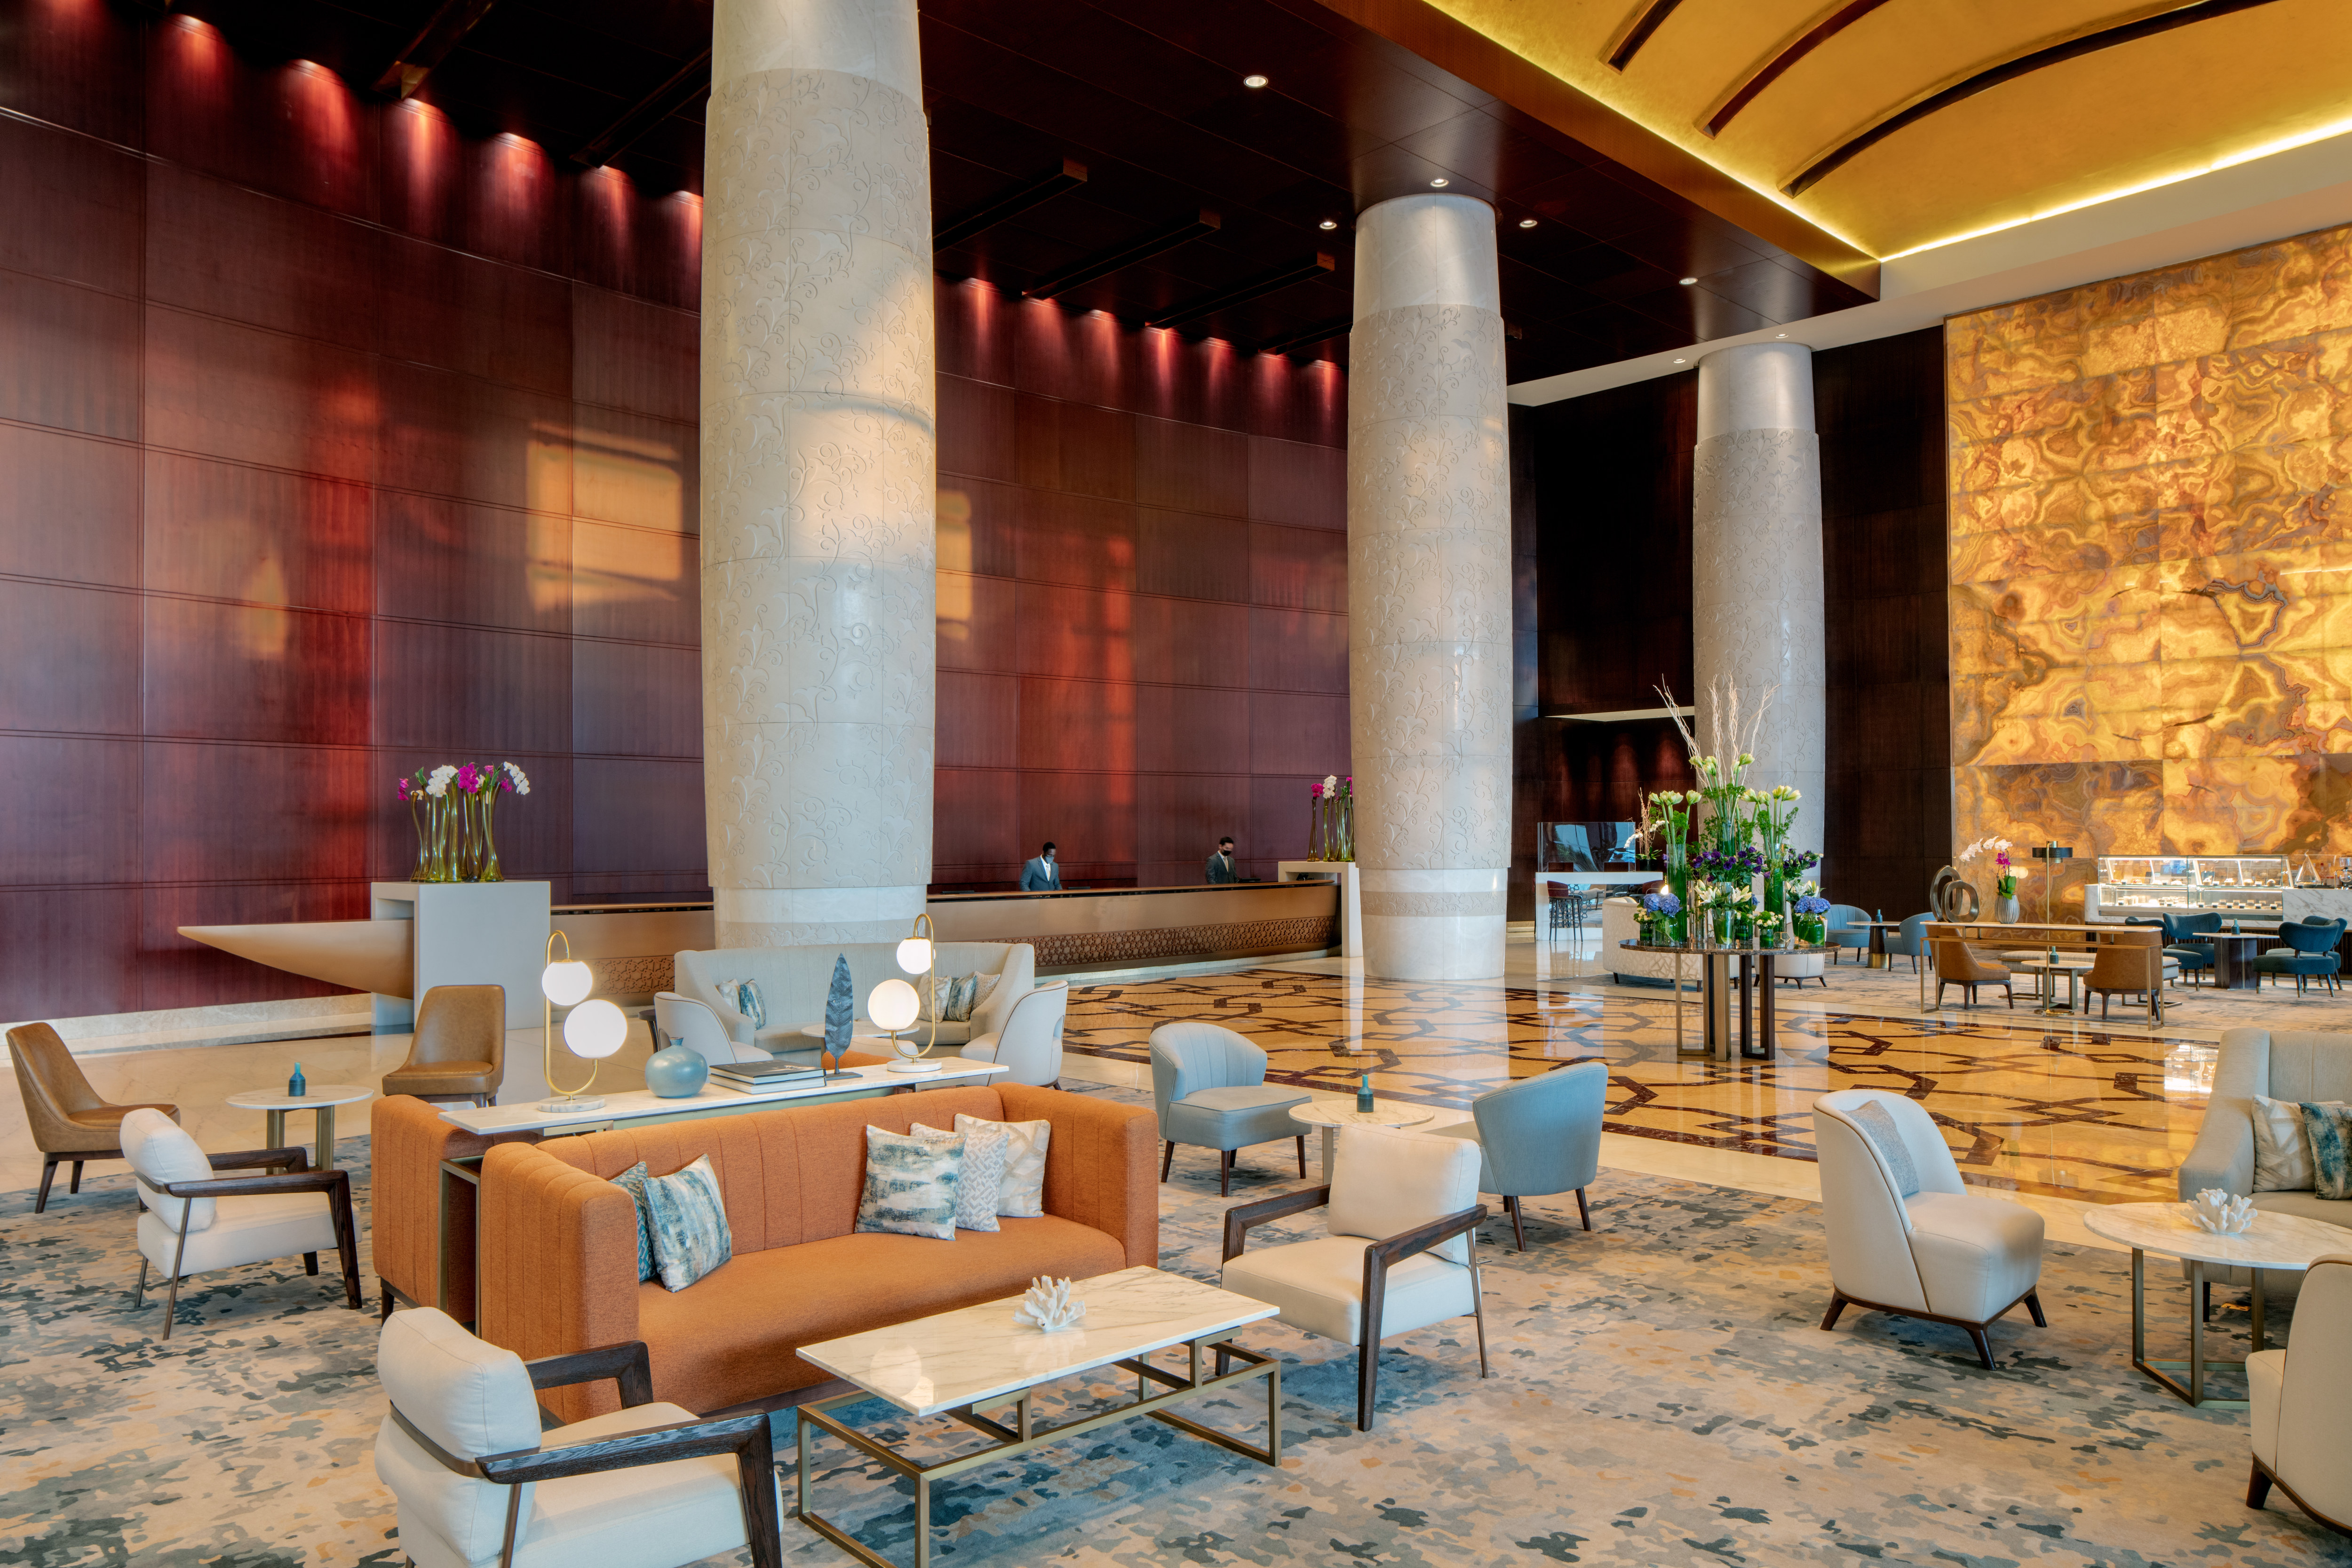 Seating Area in Lobby with Large Columns